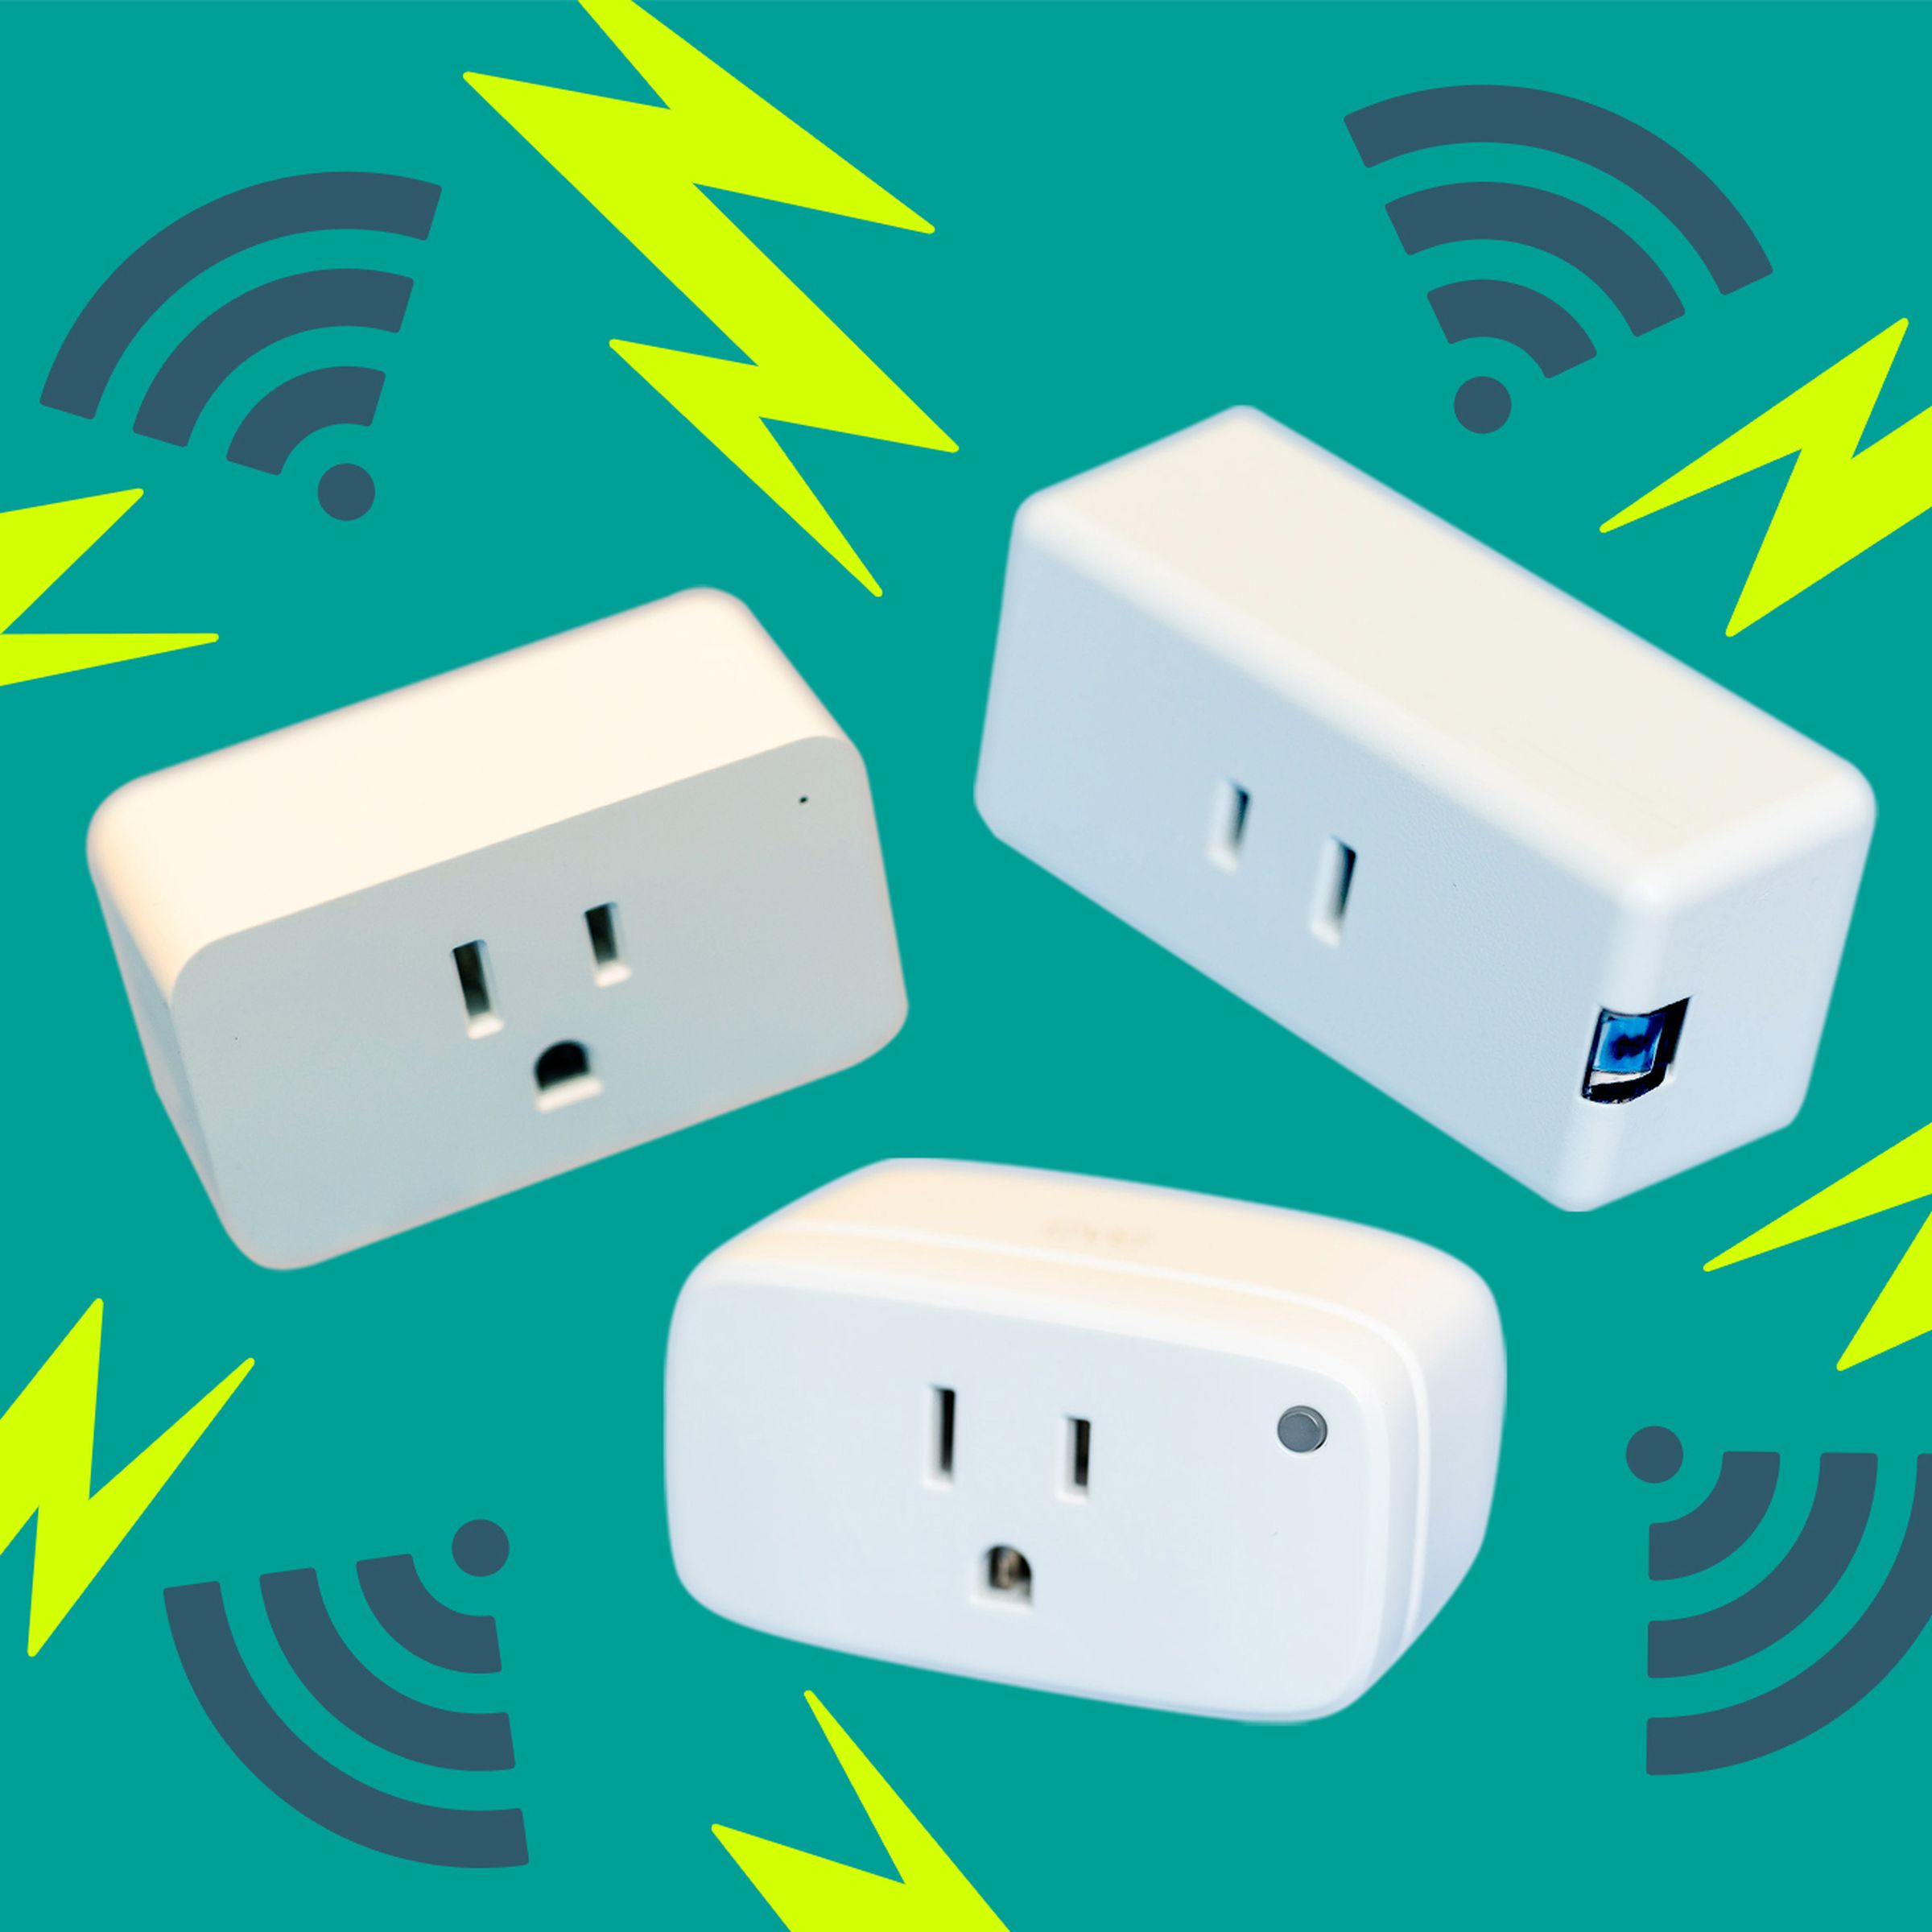 Photo illustration of different smart plugs on a background of wifi symbols and electricity.